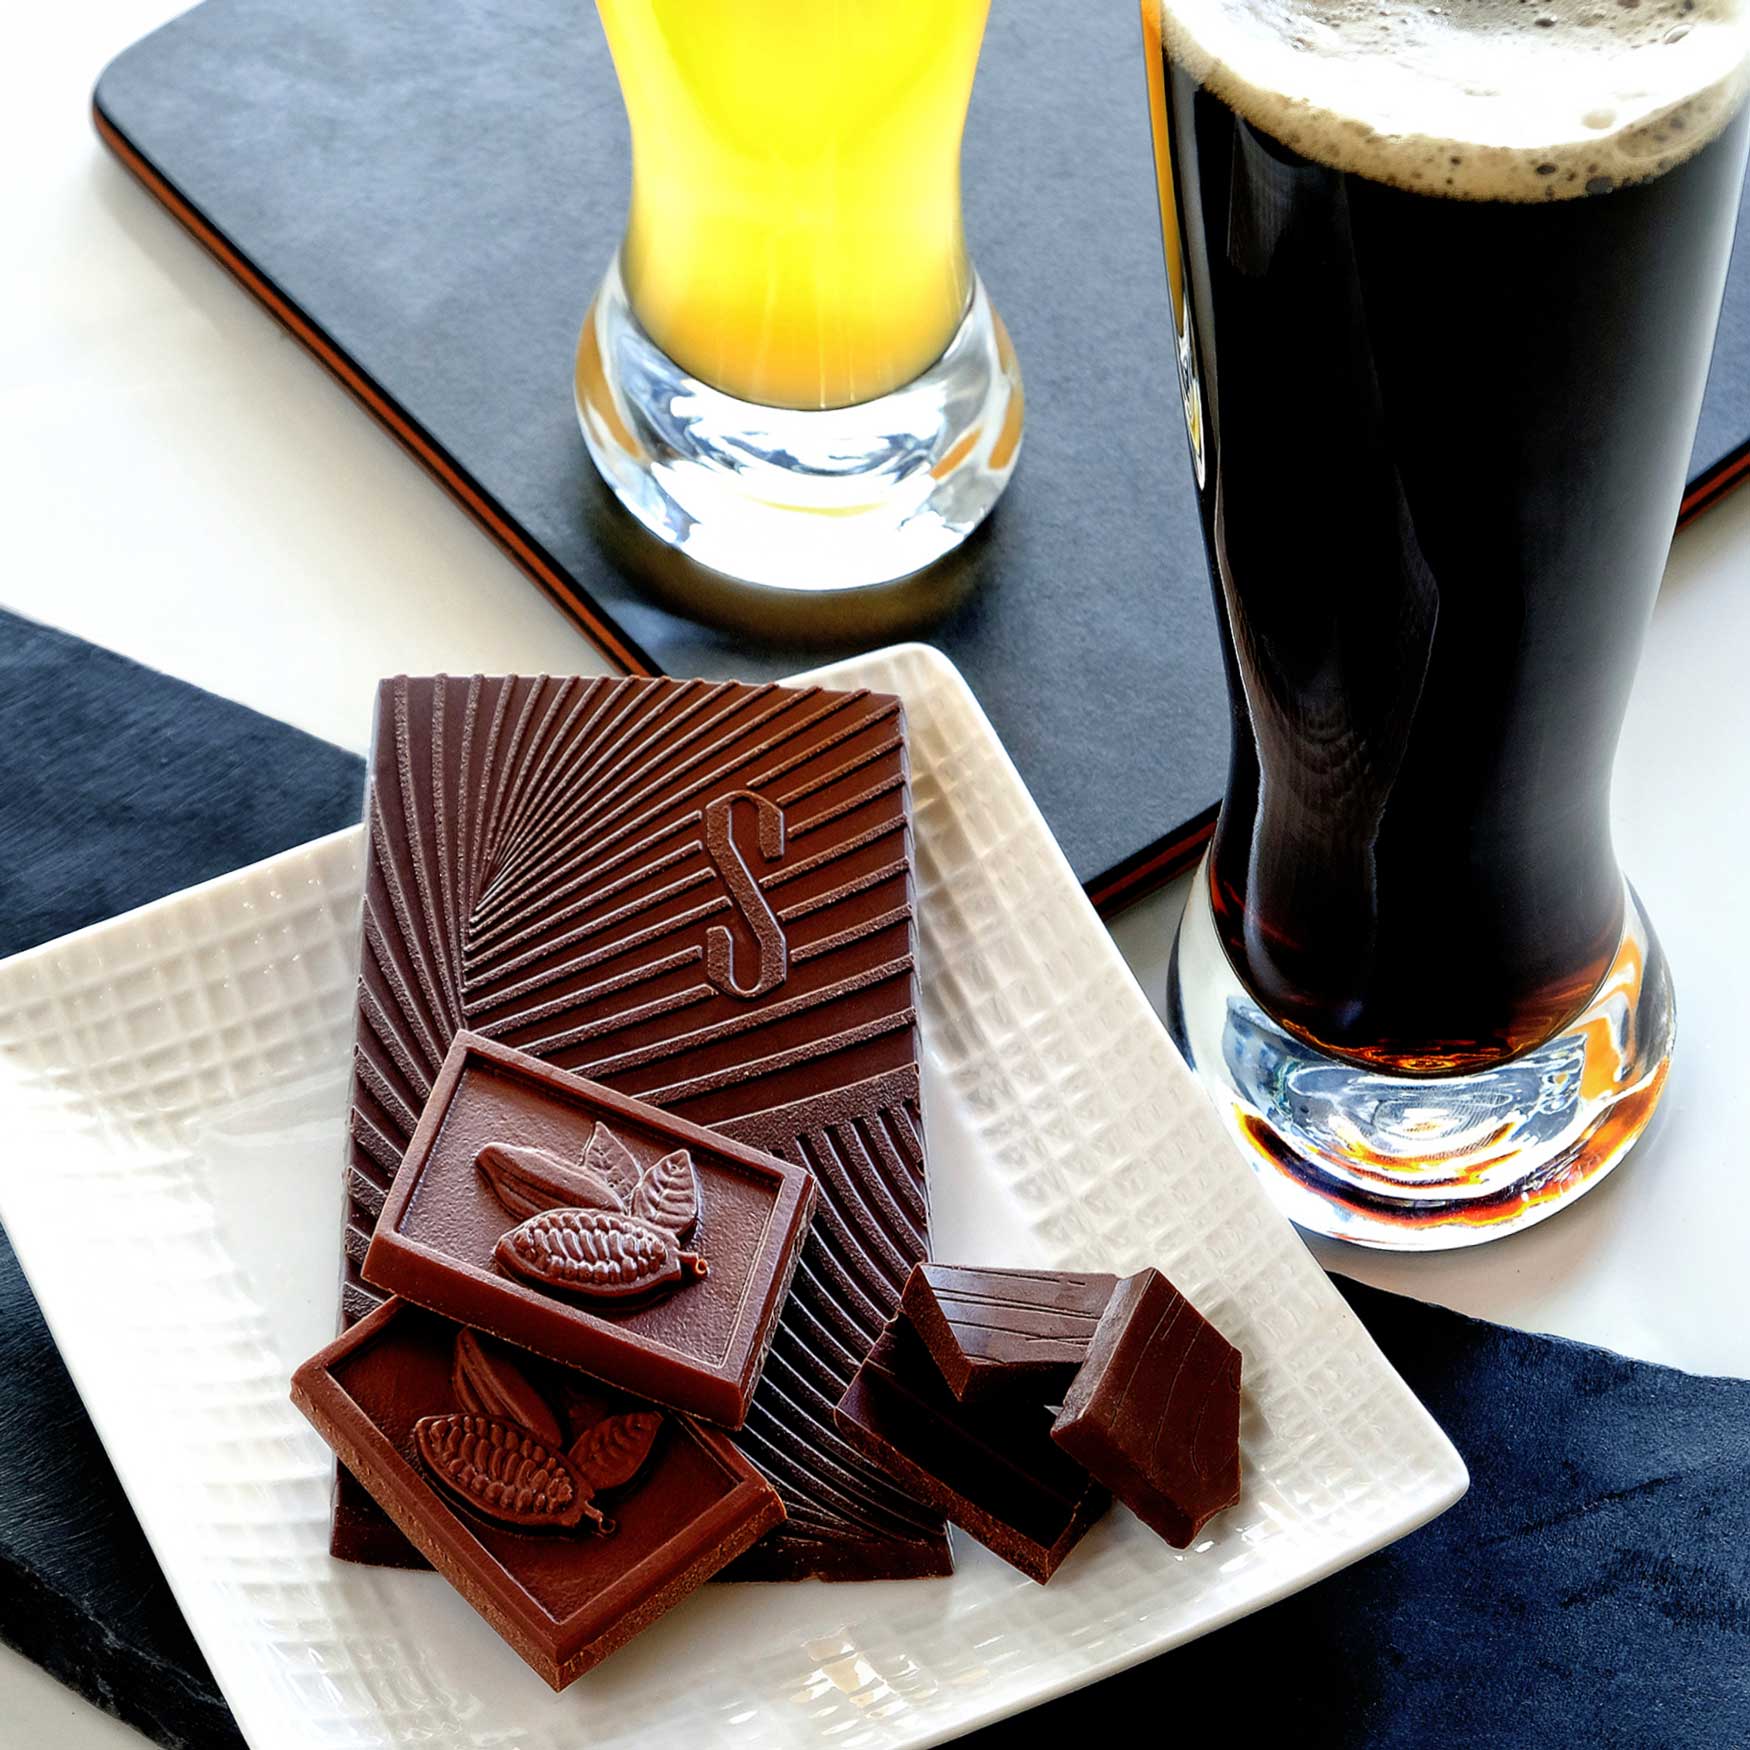 Chocolate with... Beer